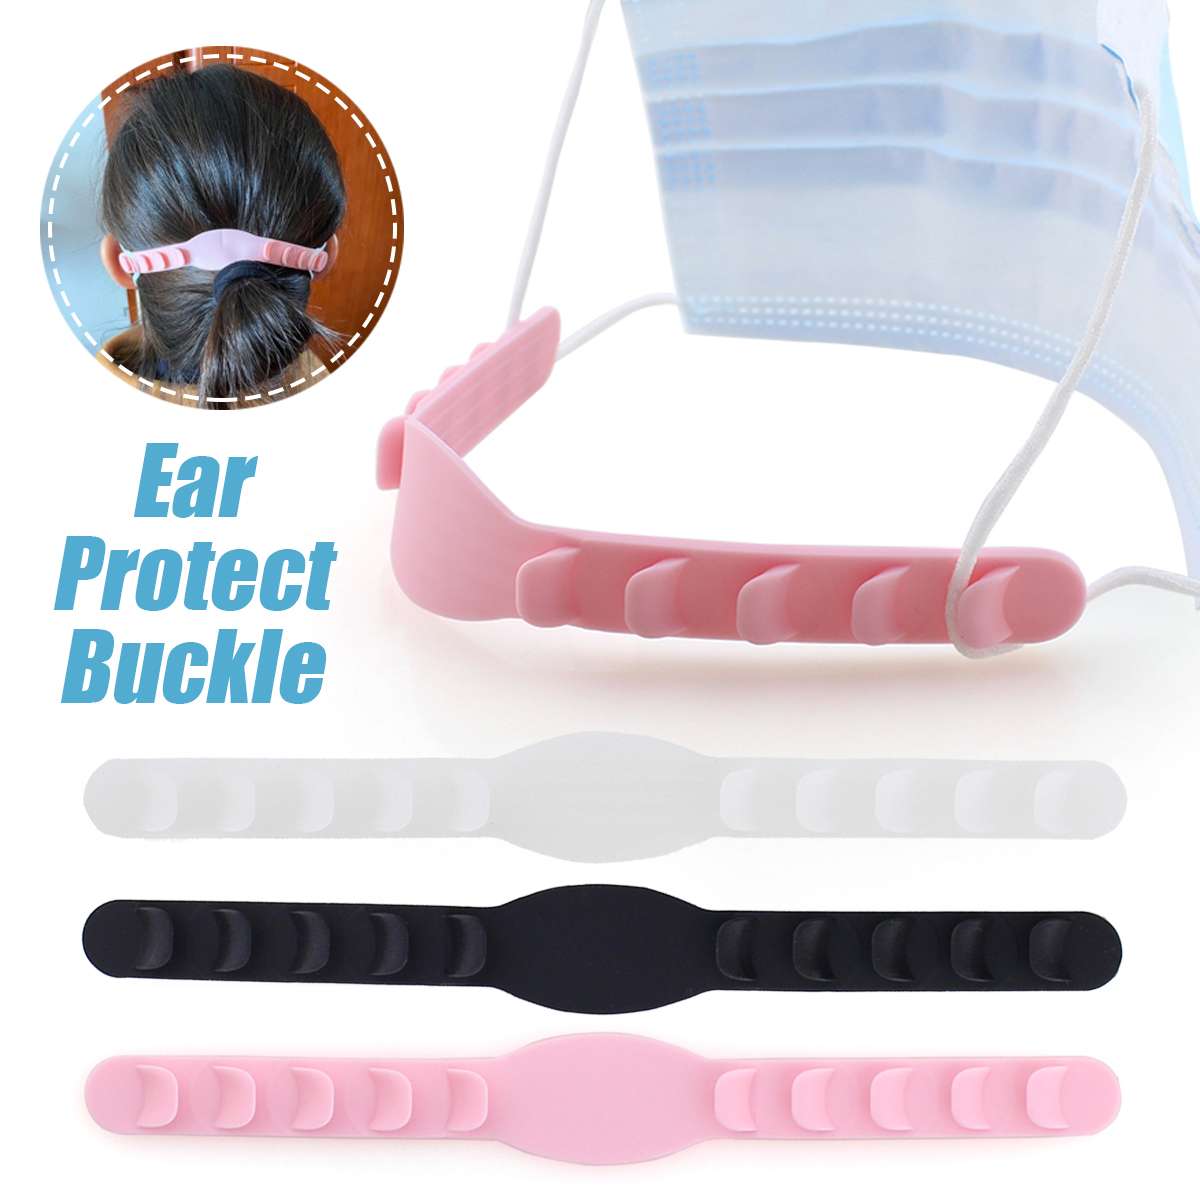 5 gear three colorAdjustable Anti-slip Mask Ear Grips Extension Hook Face Masks Buckle Holder Accessories 7.8"x0.5"